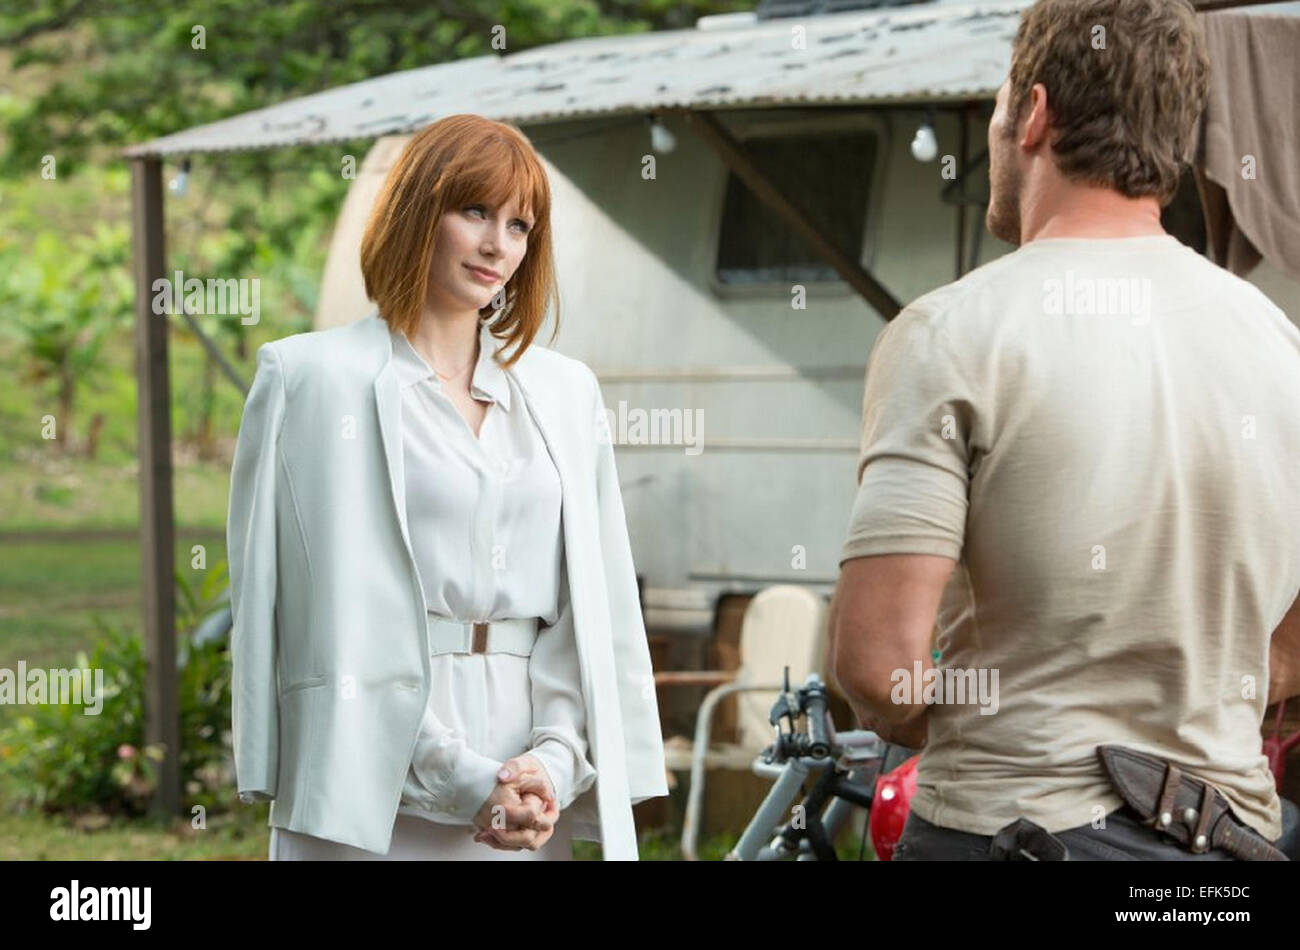 JURASSIC WORLD 2015 Universal Pictures film with Bryce Dallas Howard and Chris Pratt Stock Photo